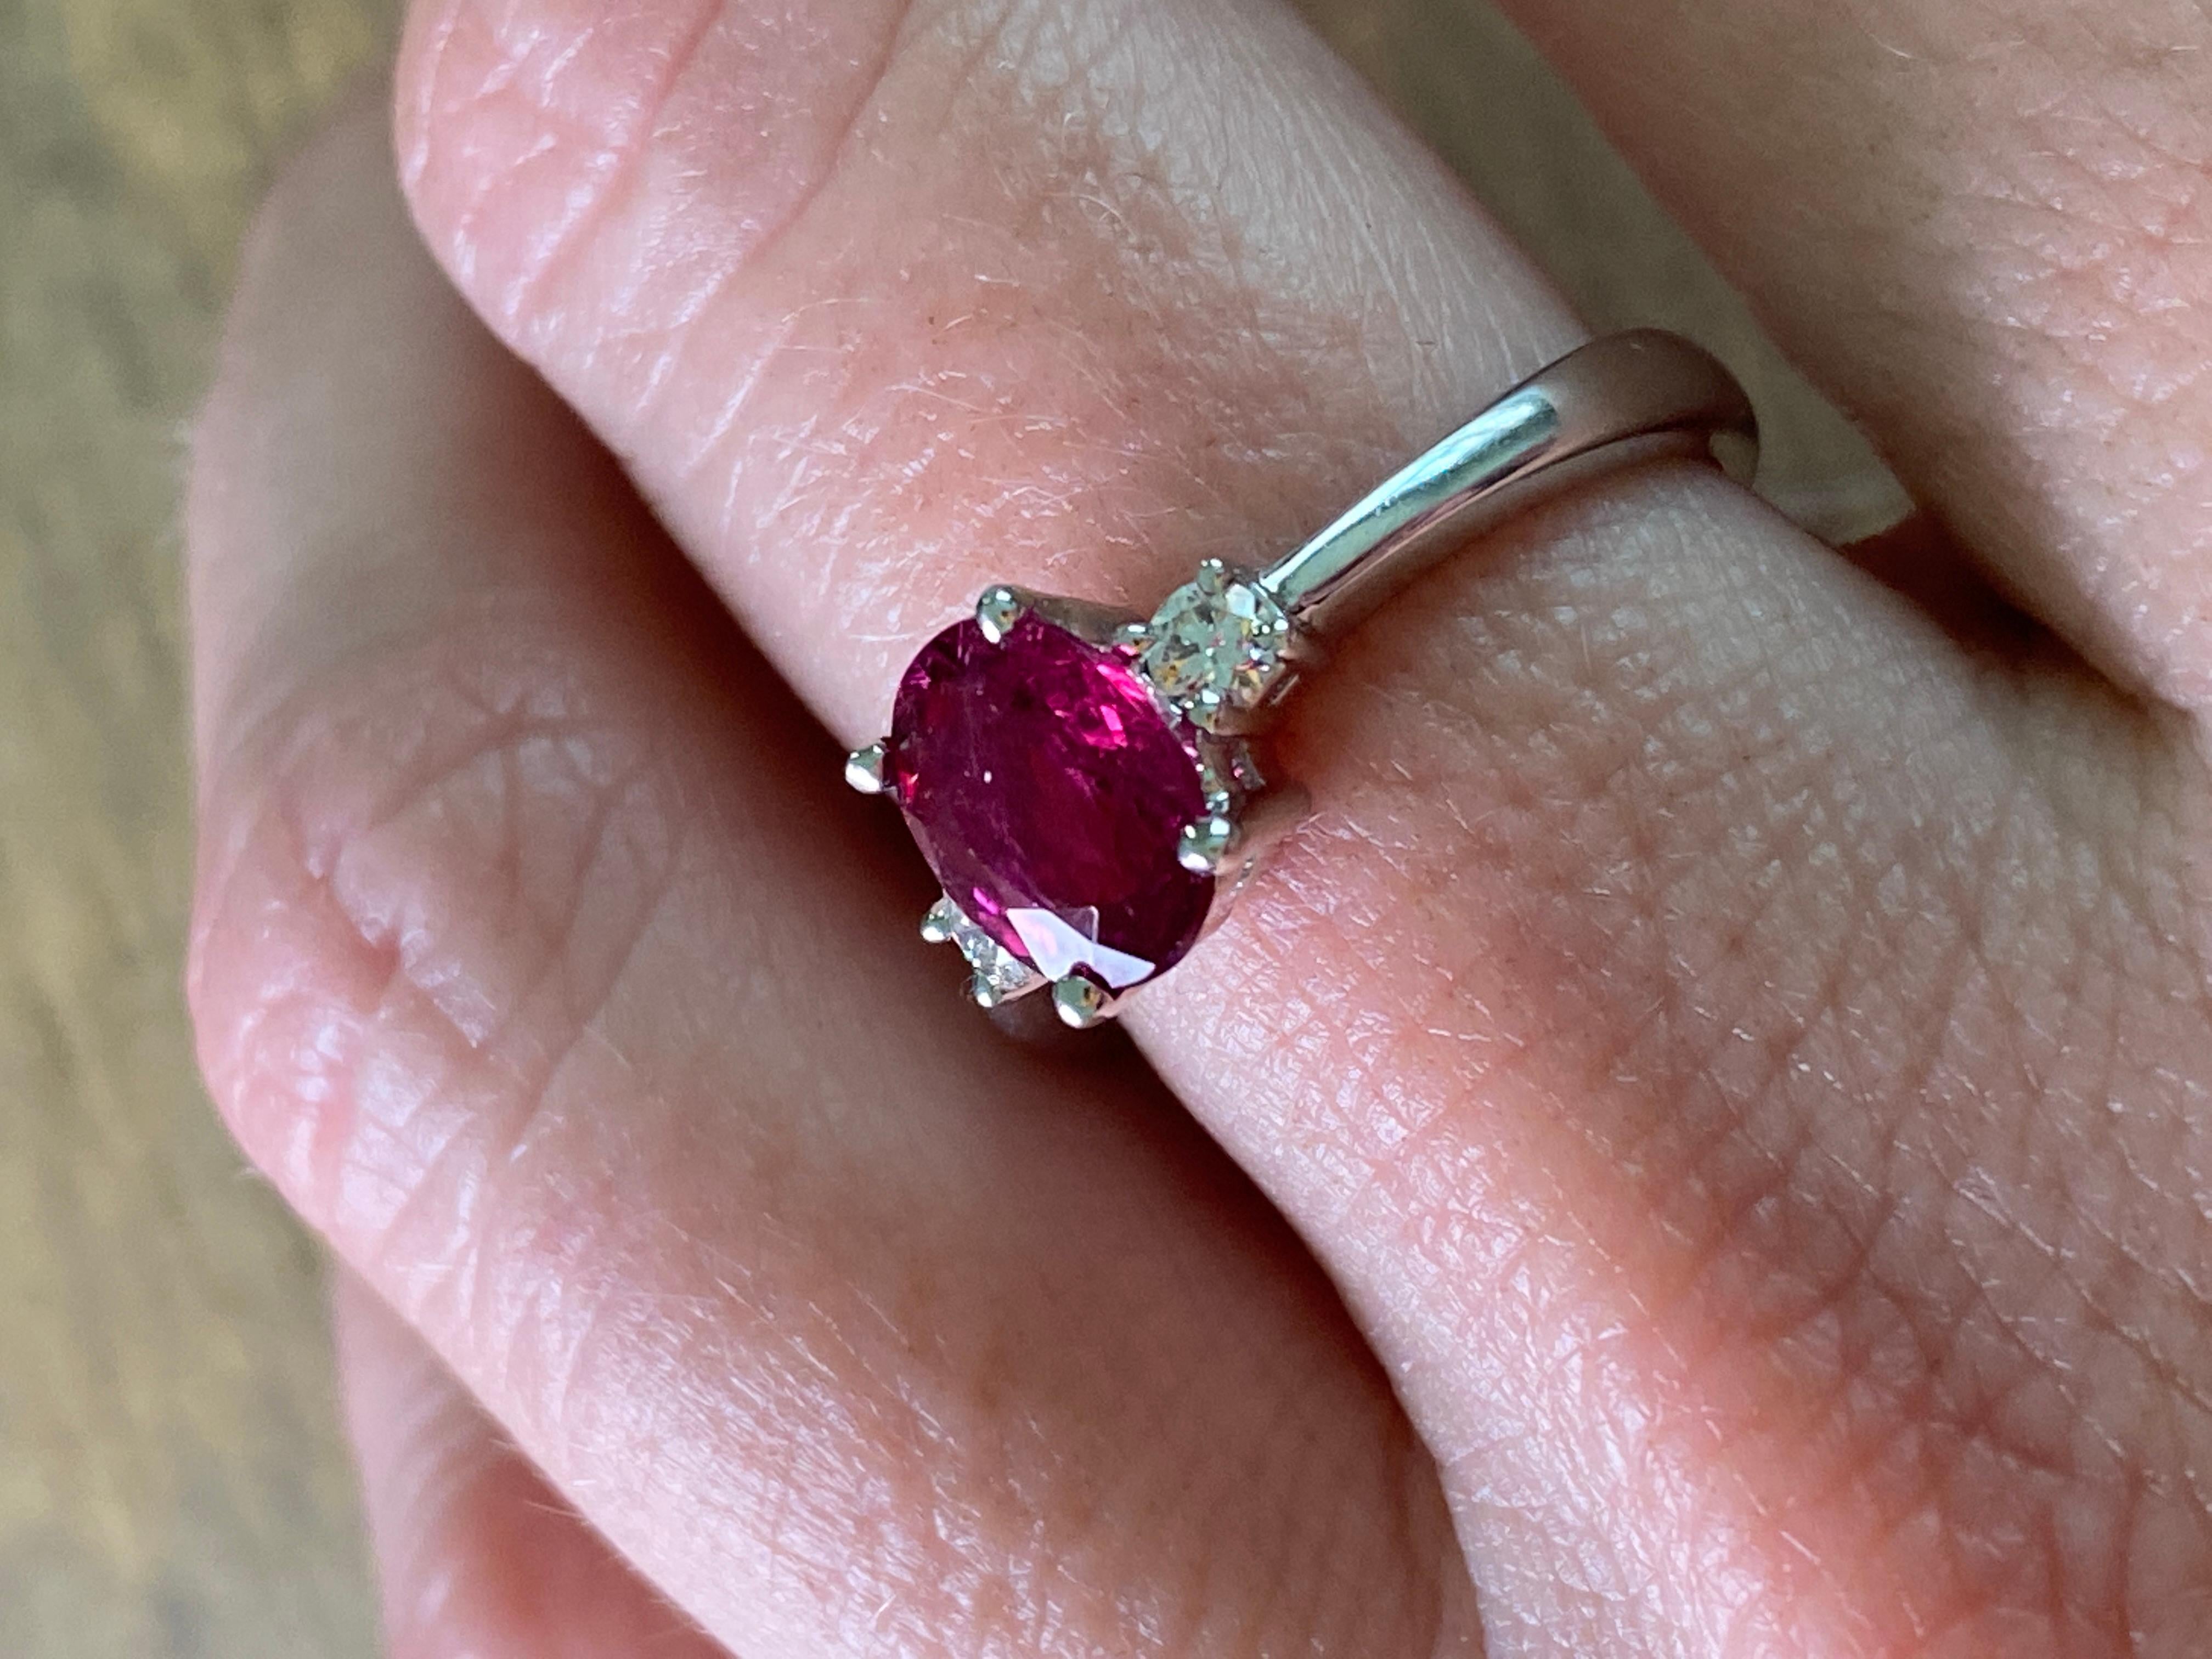 Contemporary Bright, Pink, Oval Tourmaline Engagement Ring with Diamonds, 14K White Gold